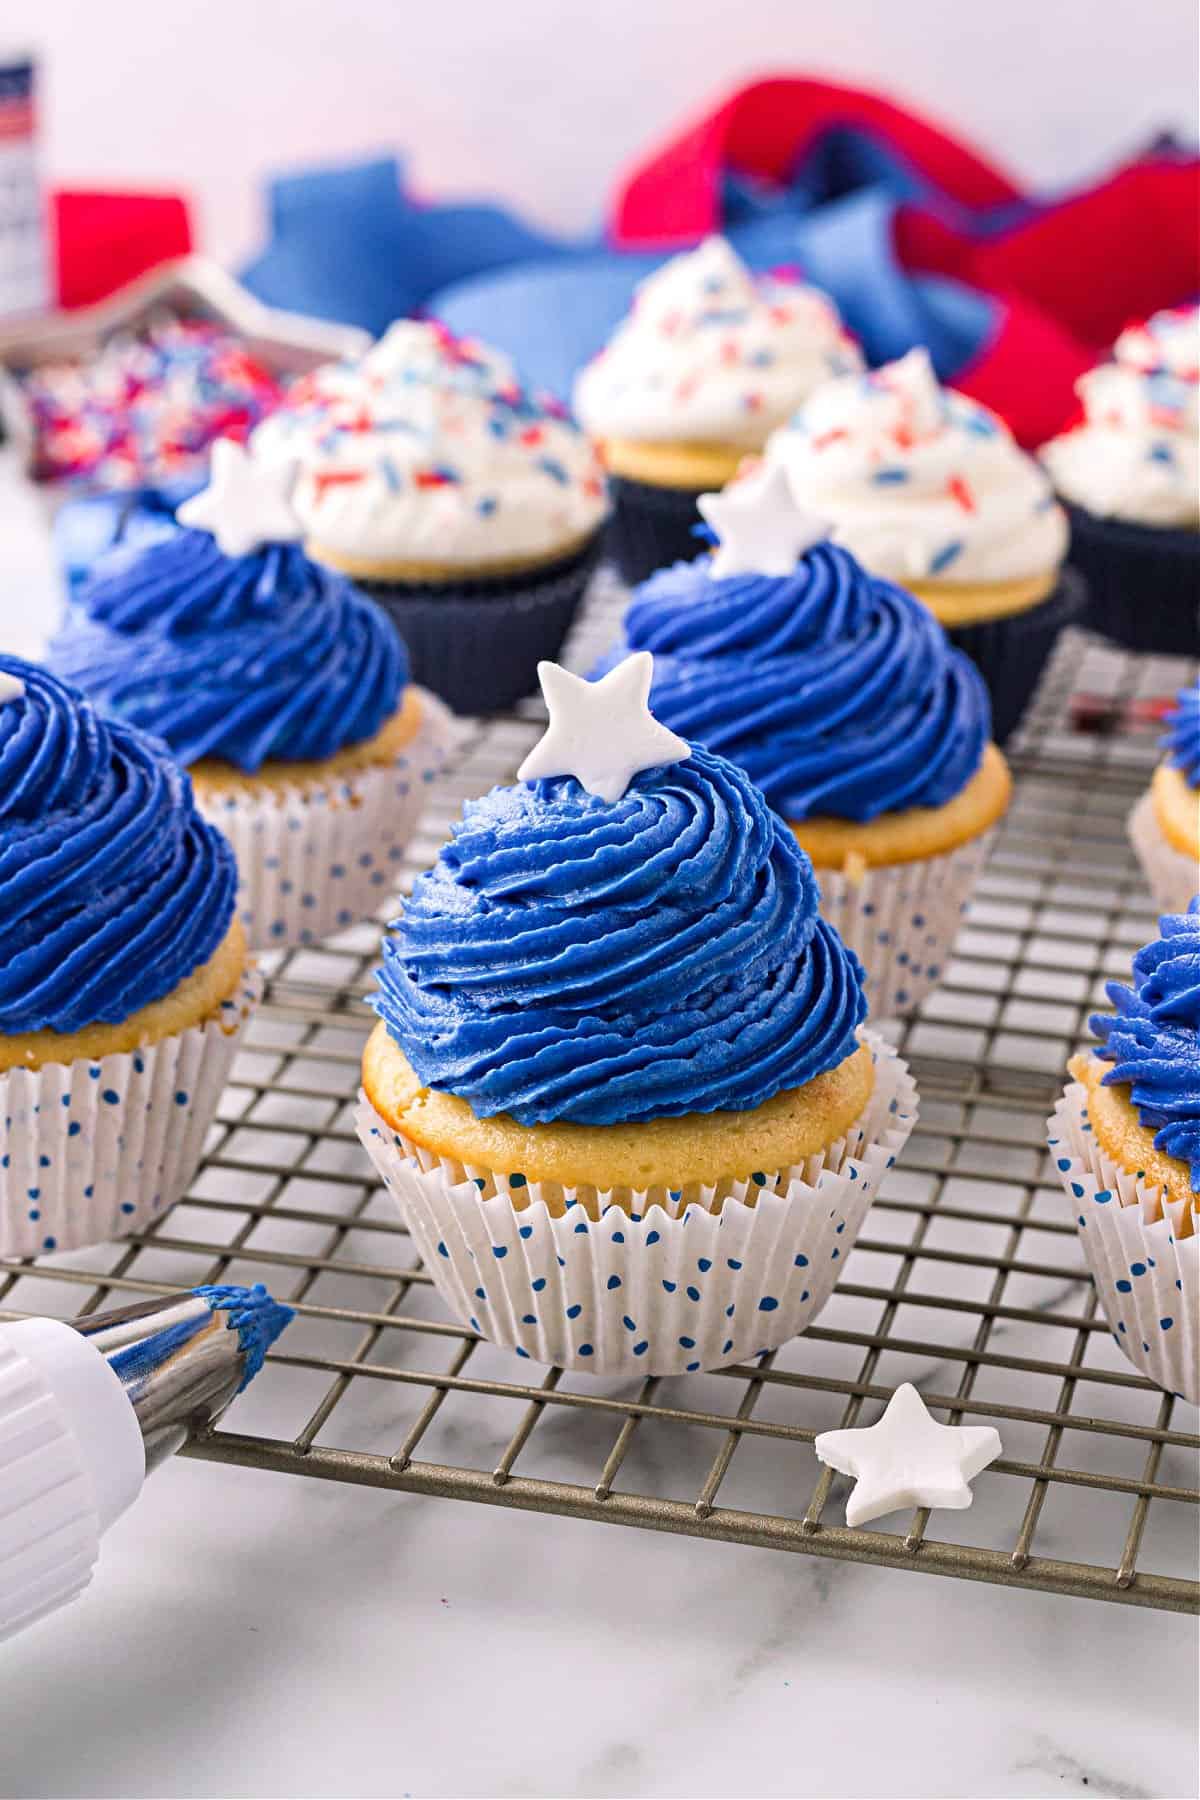 White cupcakes with blue frosting for 4th of July.